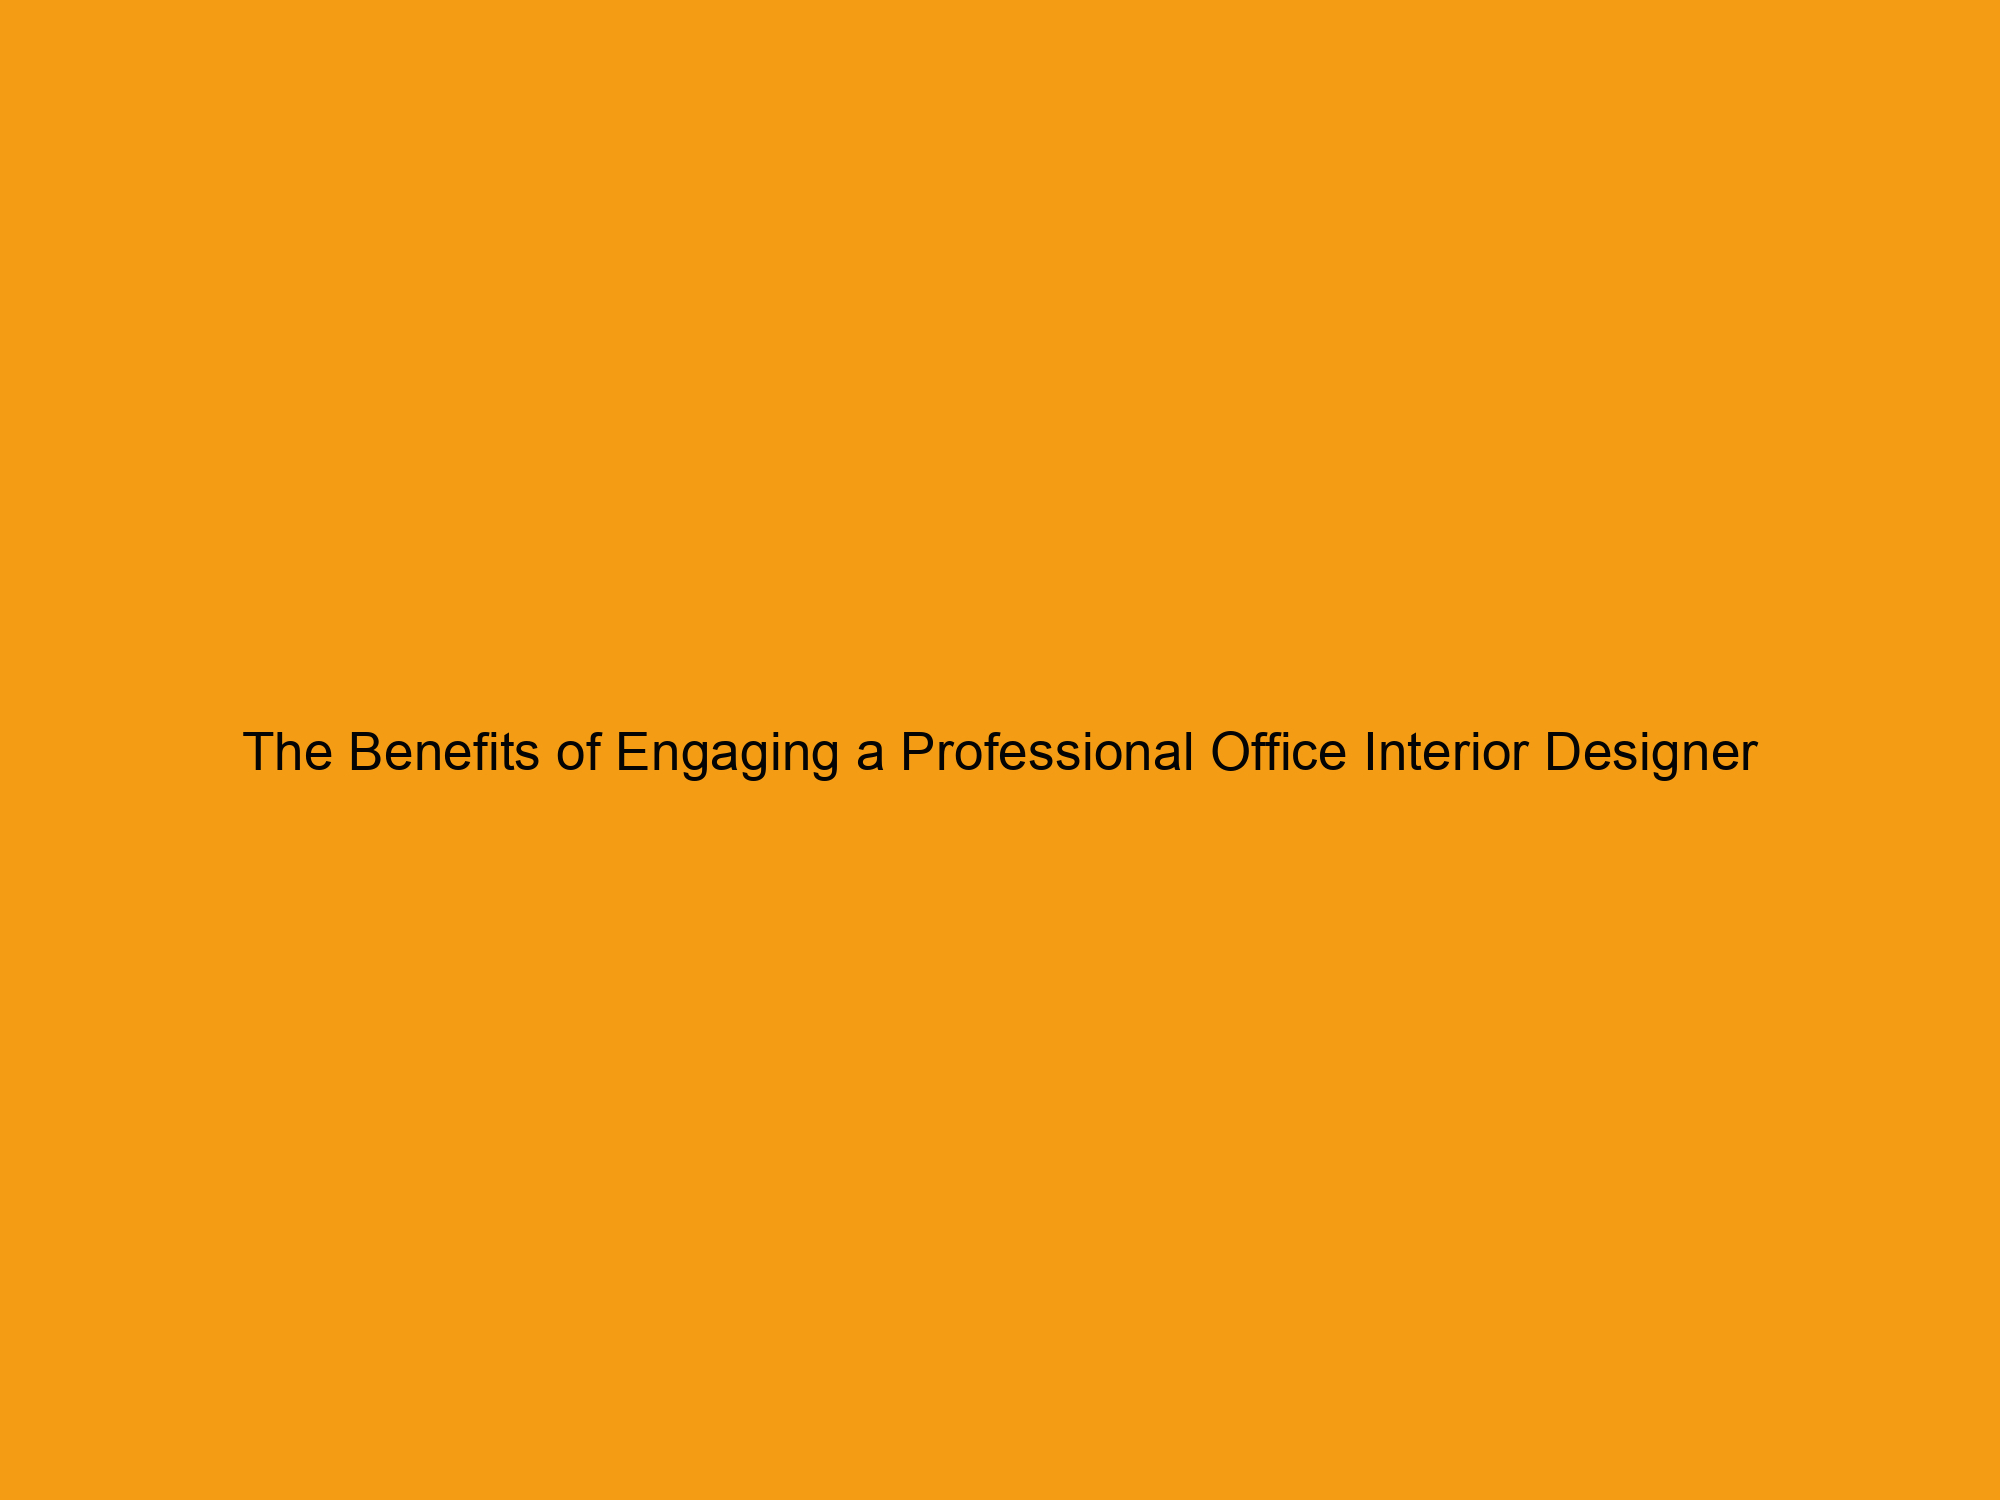 The Benefits of Engaging a Professional Office Interior Designer